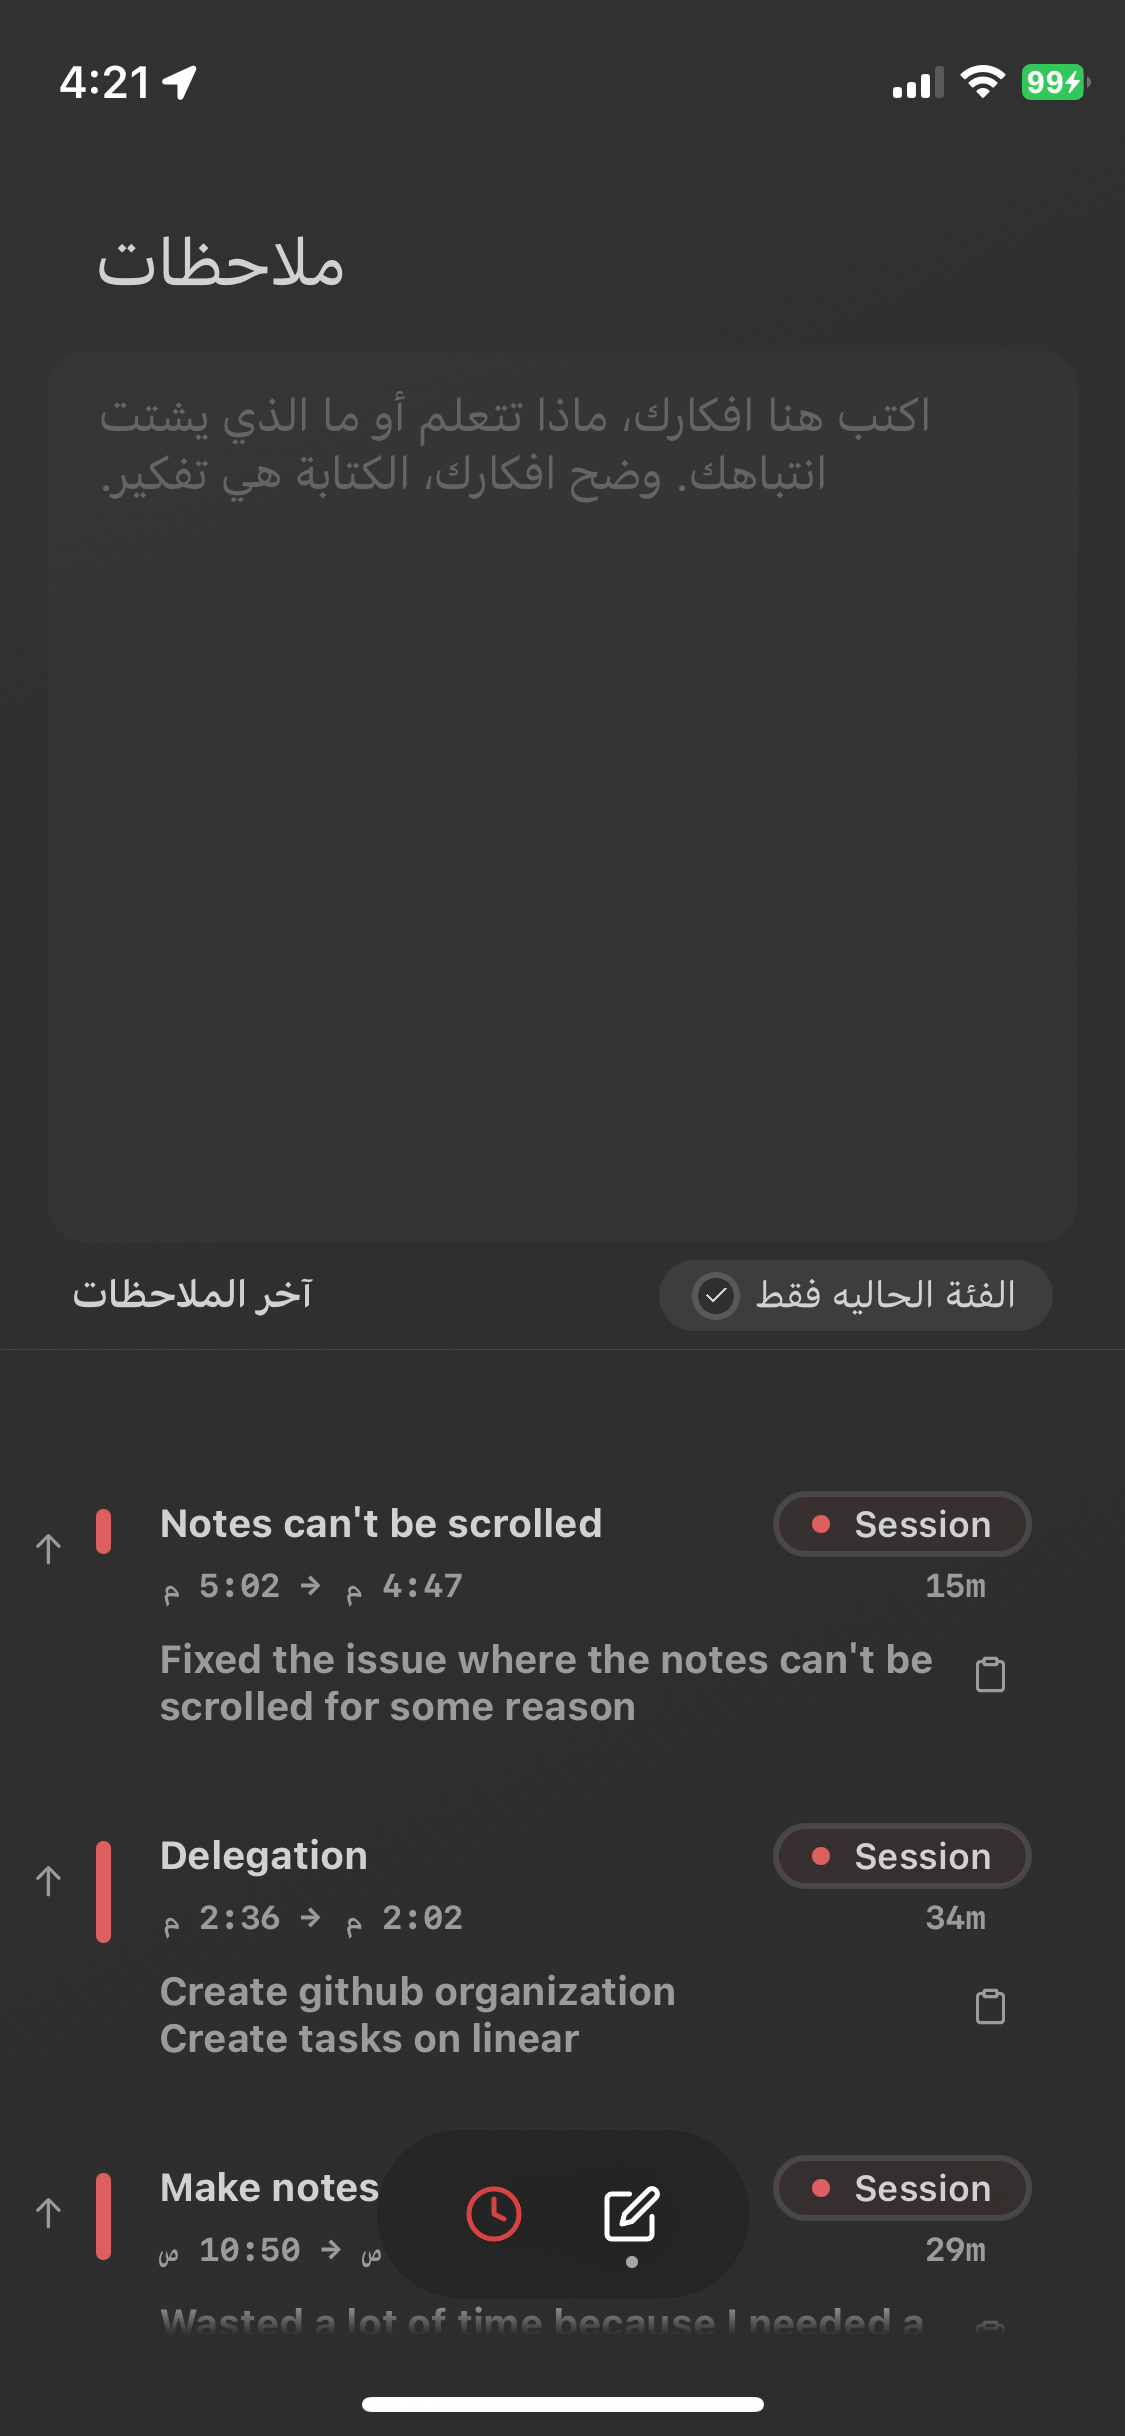 Copy notes to clipboard